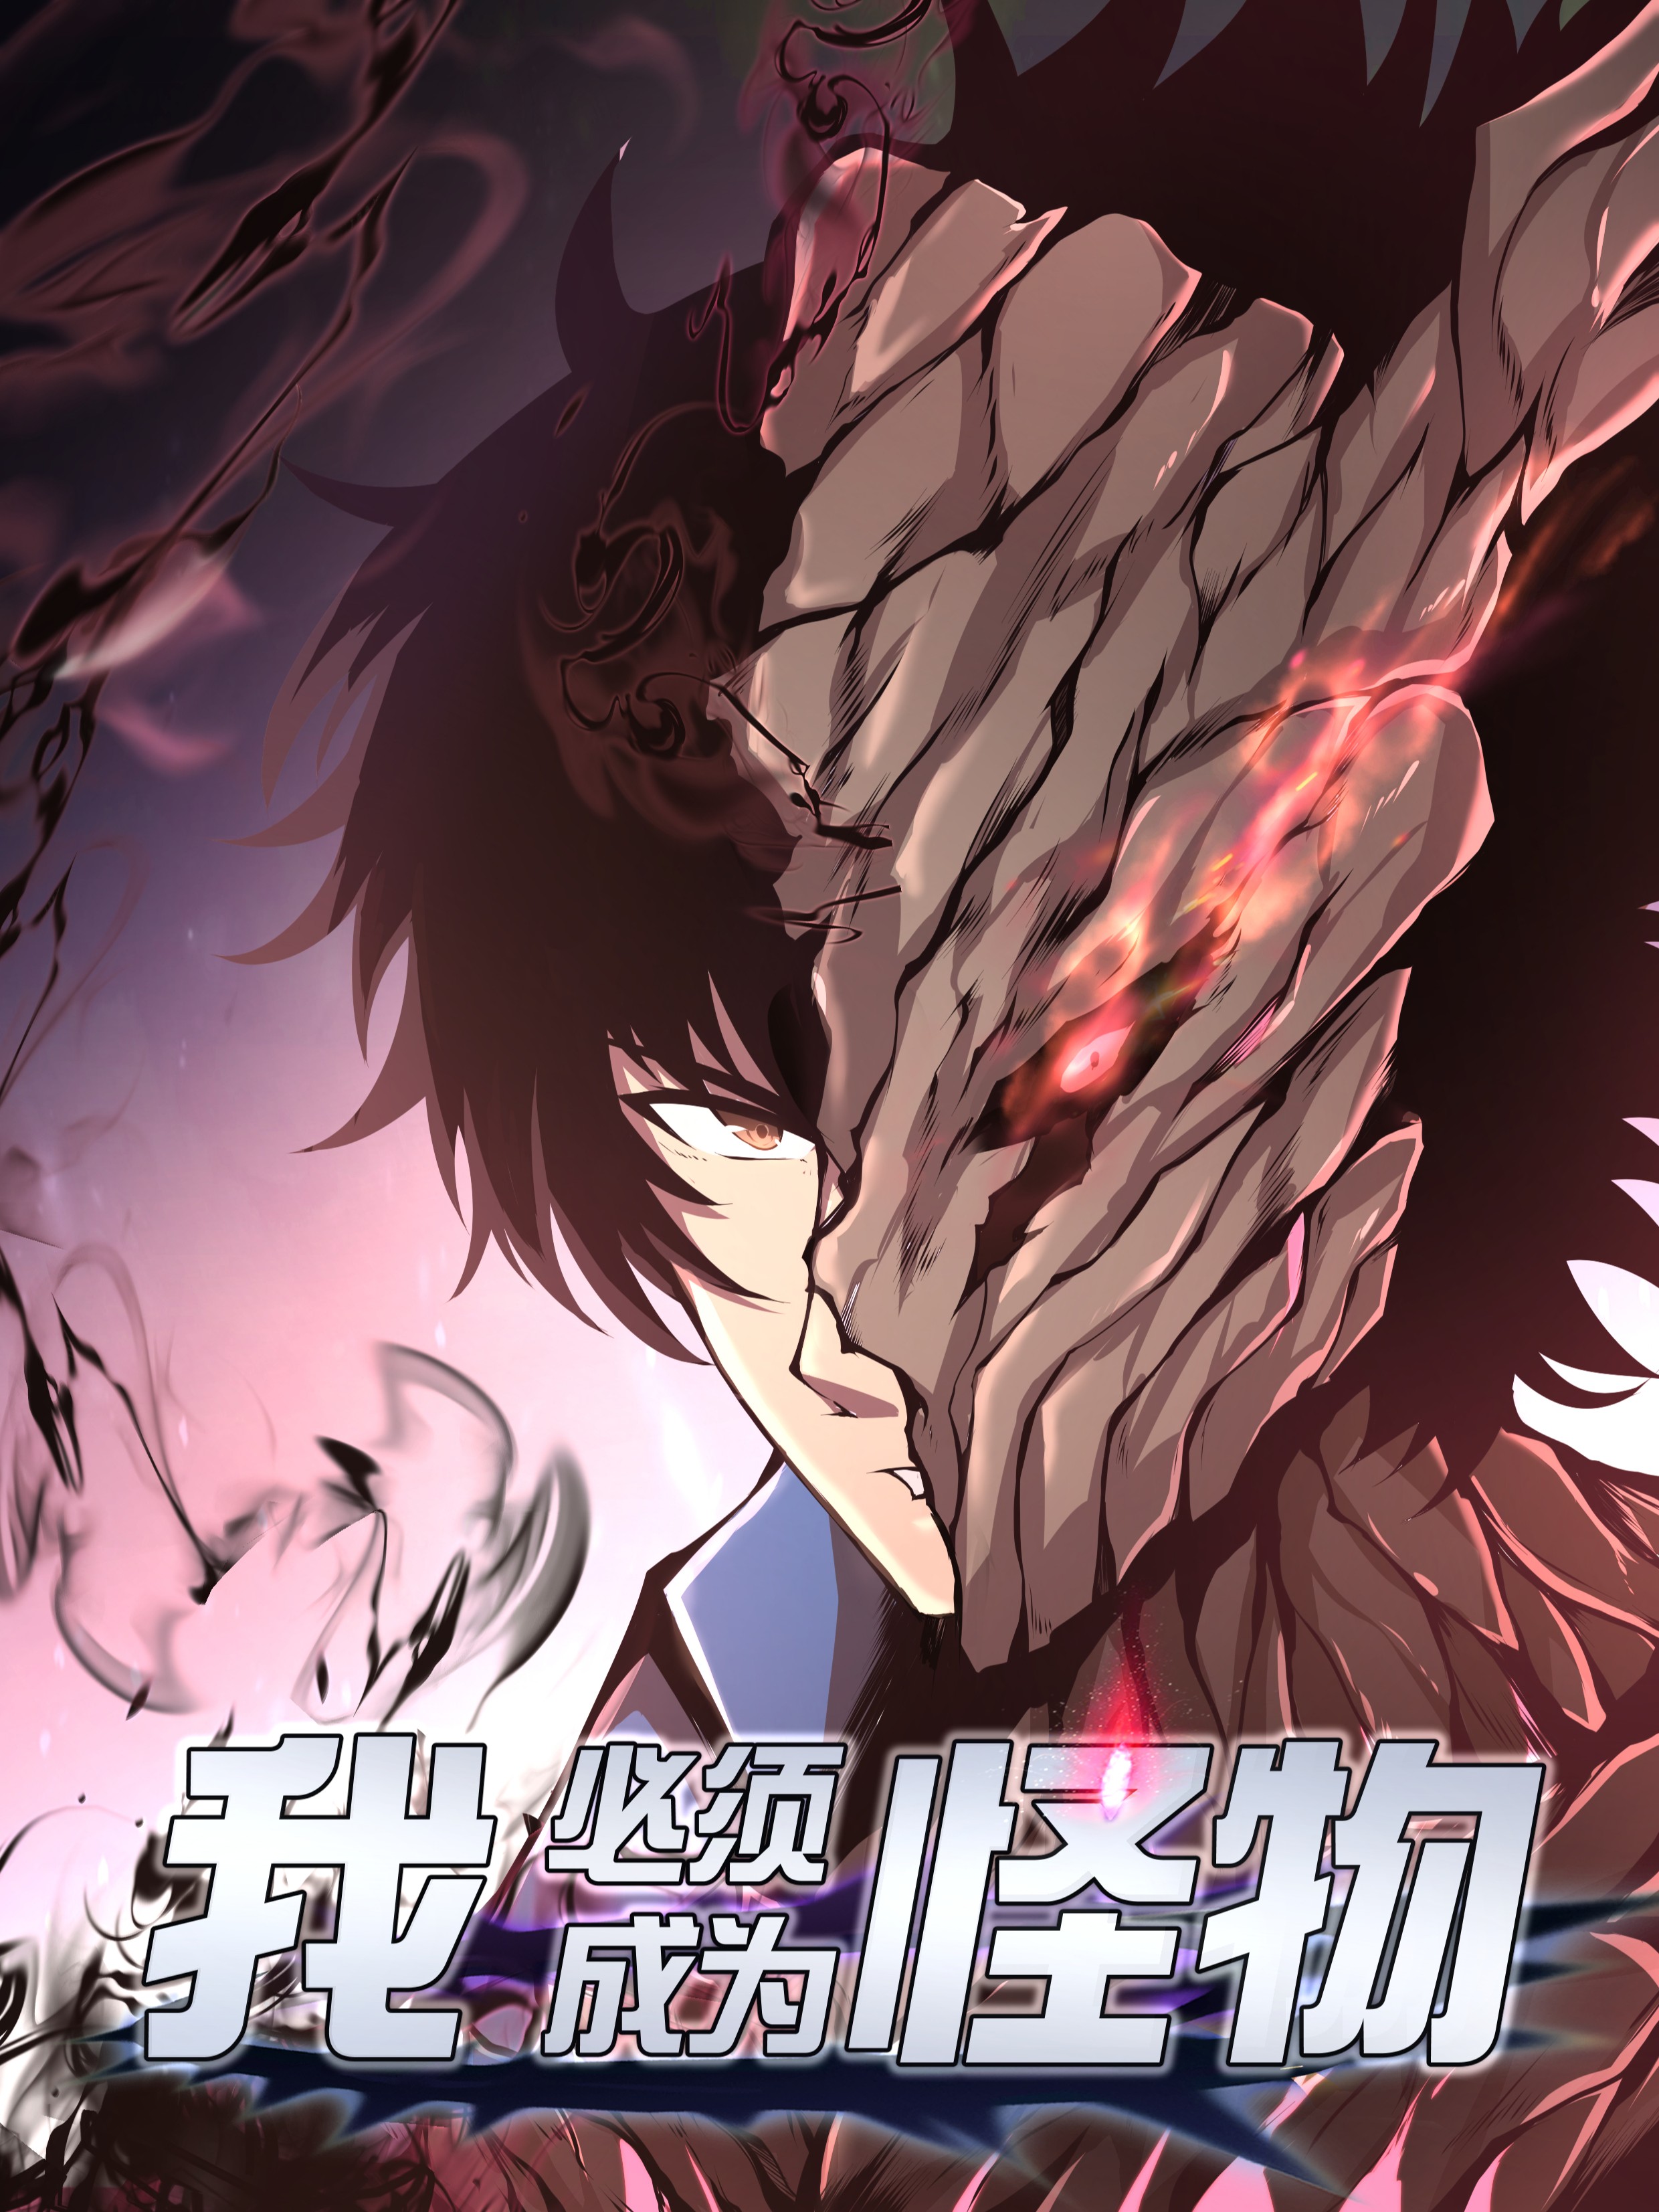 Reborn As A Monster Ch 2 I Have to Be a Monster - MangaDex